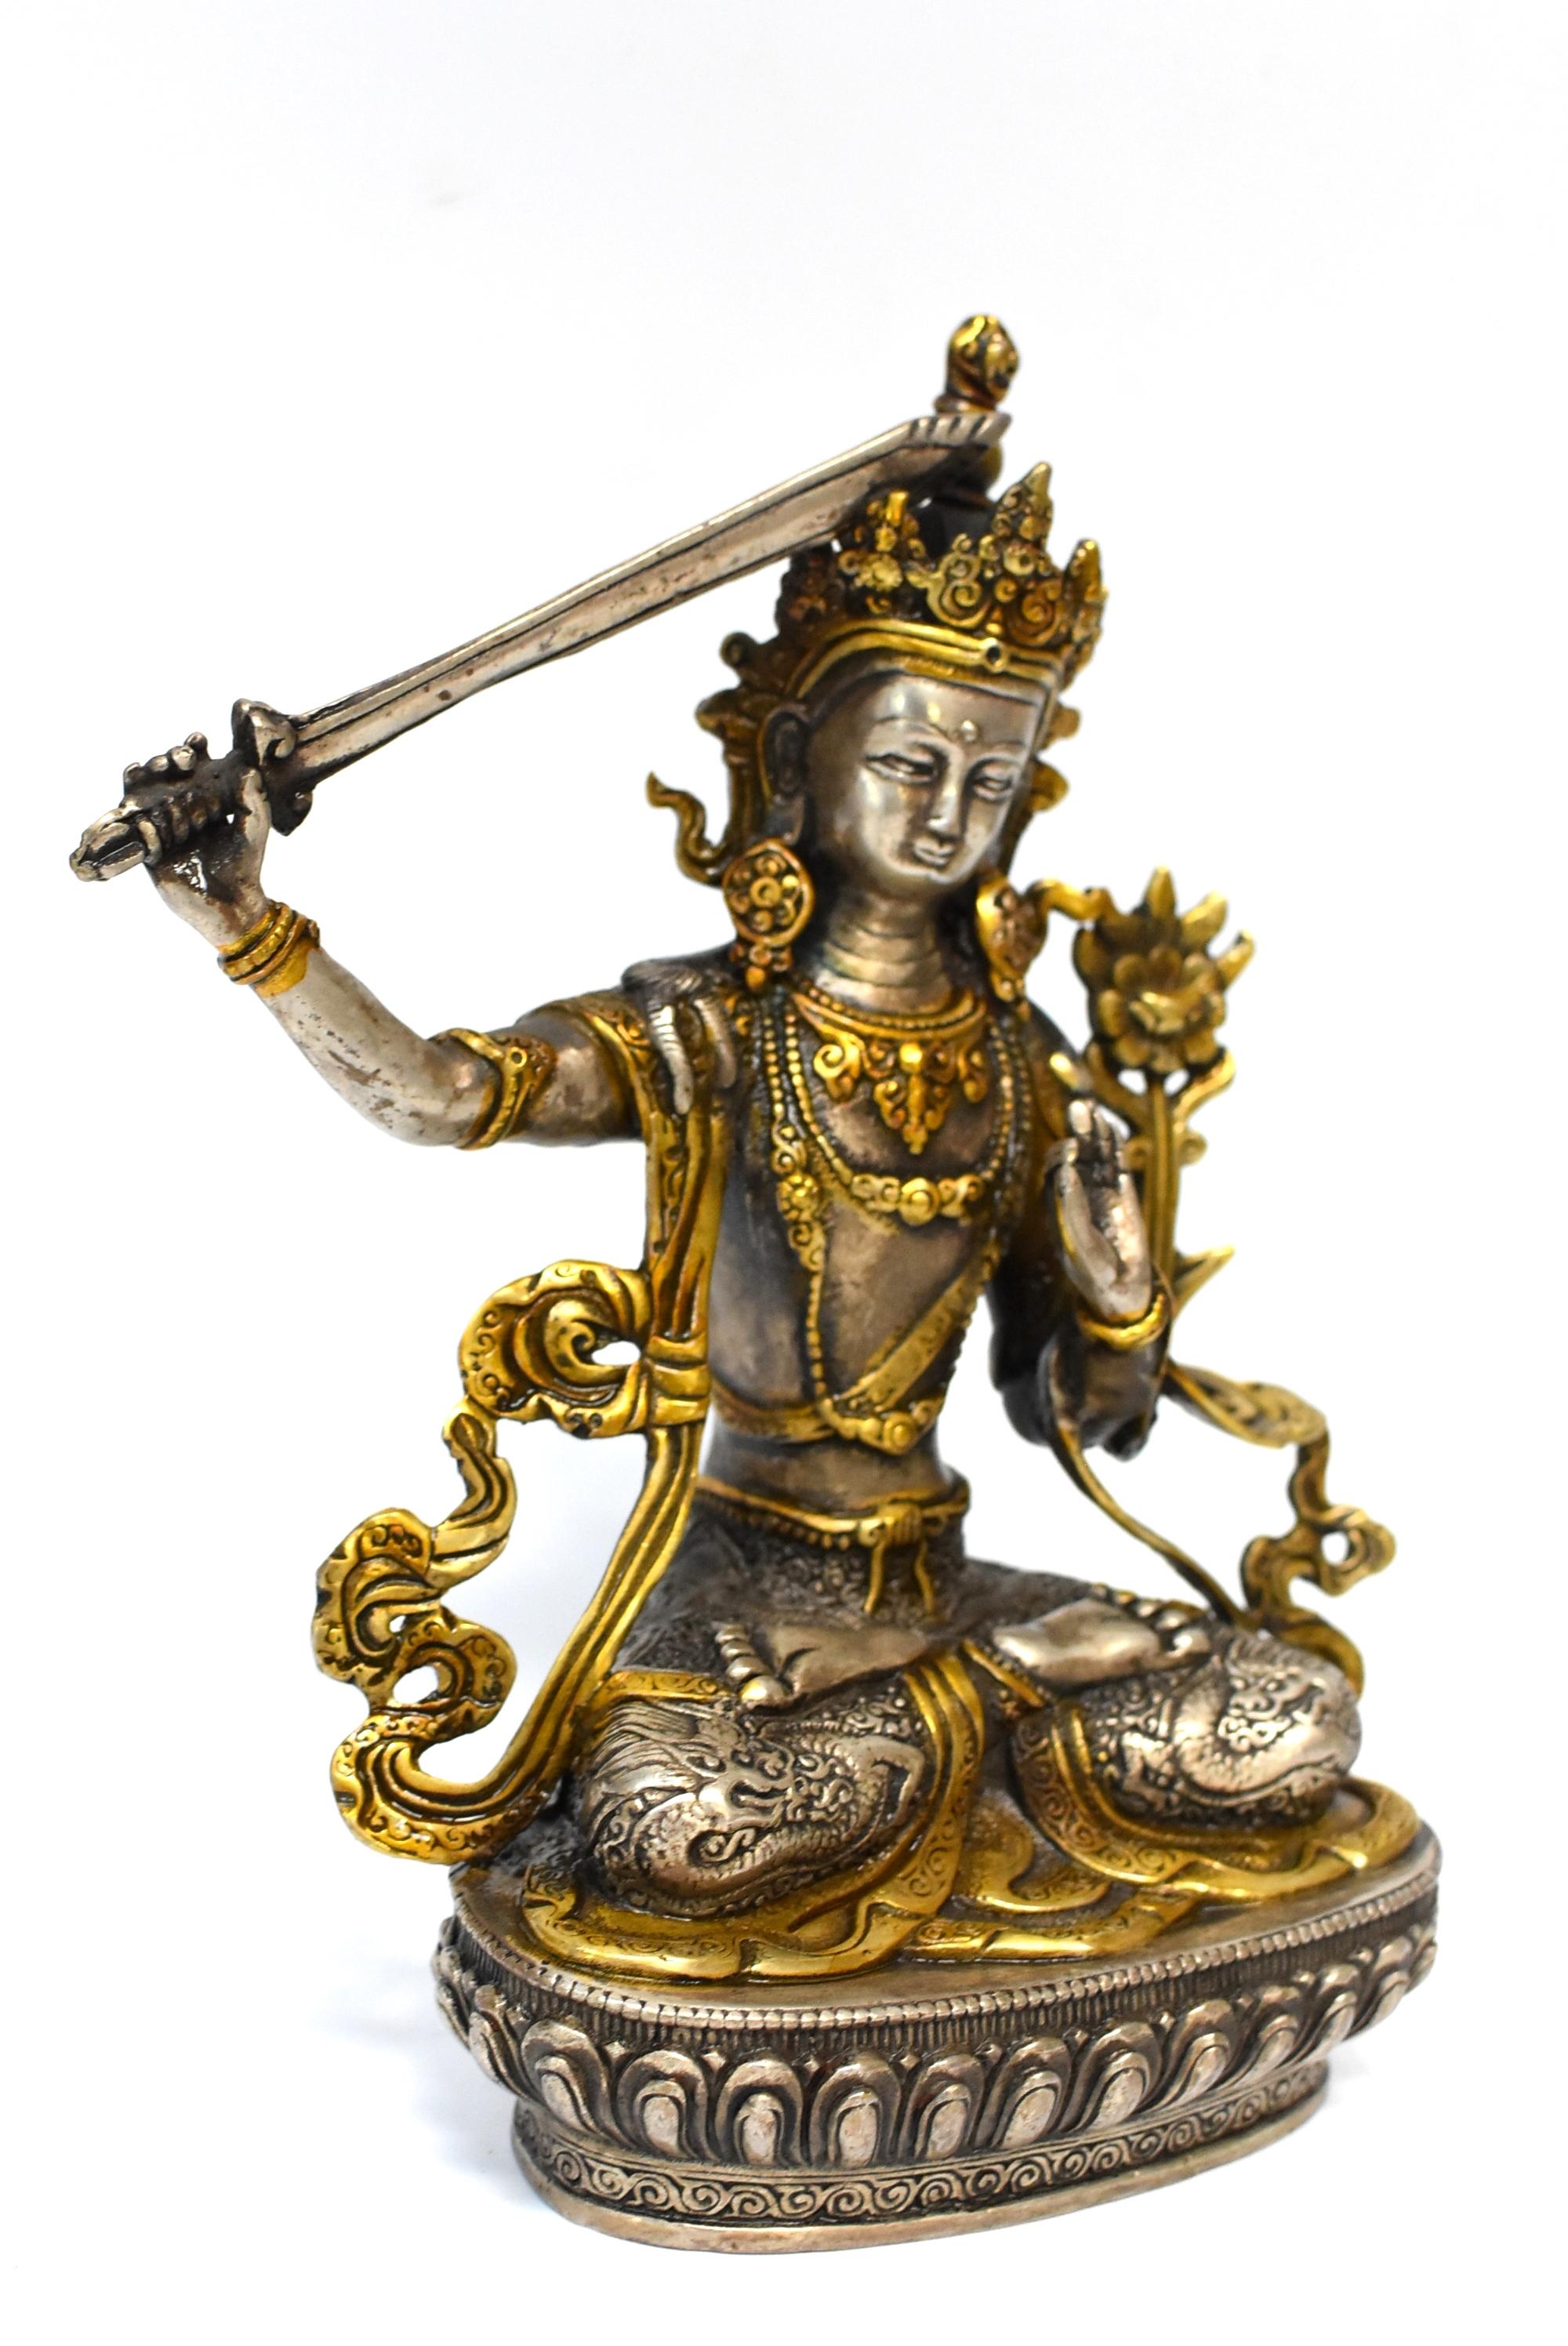 A beautiful statue of silvered bronze Tibetan Bodhisattva Manjushree with accent of golden highlights. Legend has it that he cuts water with the sword to divide the water resource to irrigate dry valleys. Manjushree is the God of Wisdom. In this